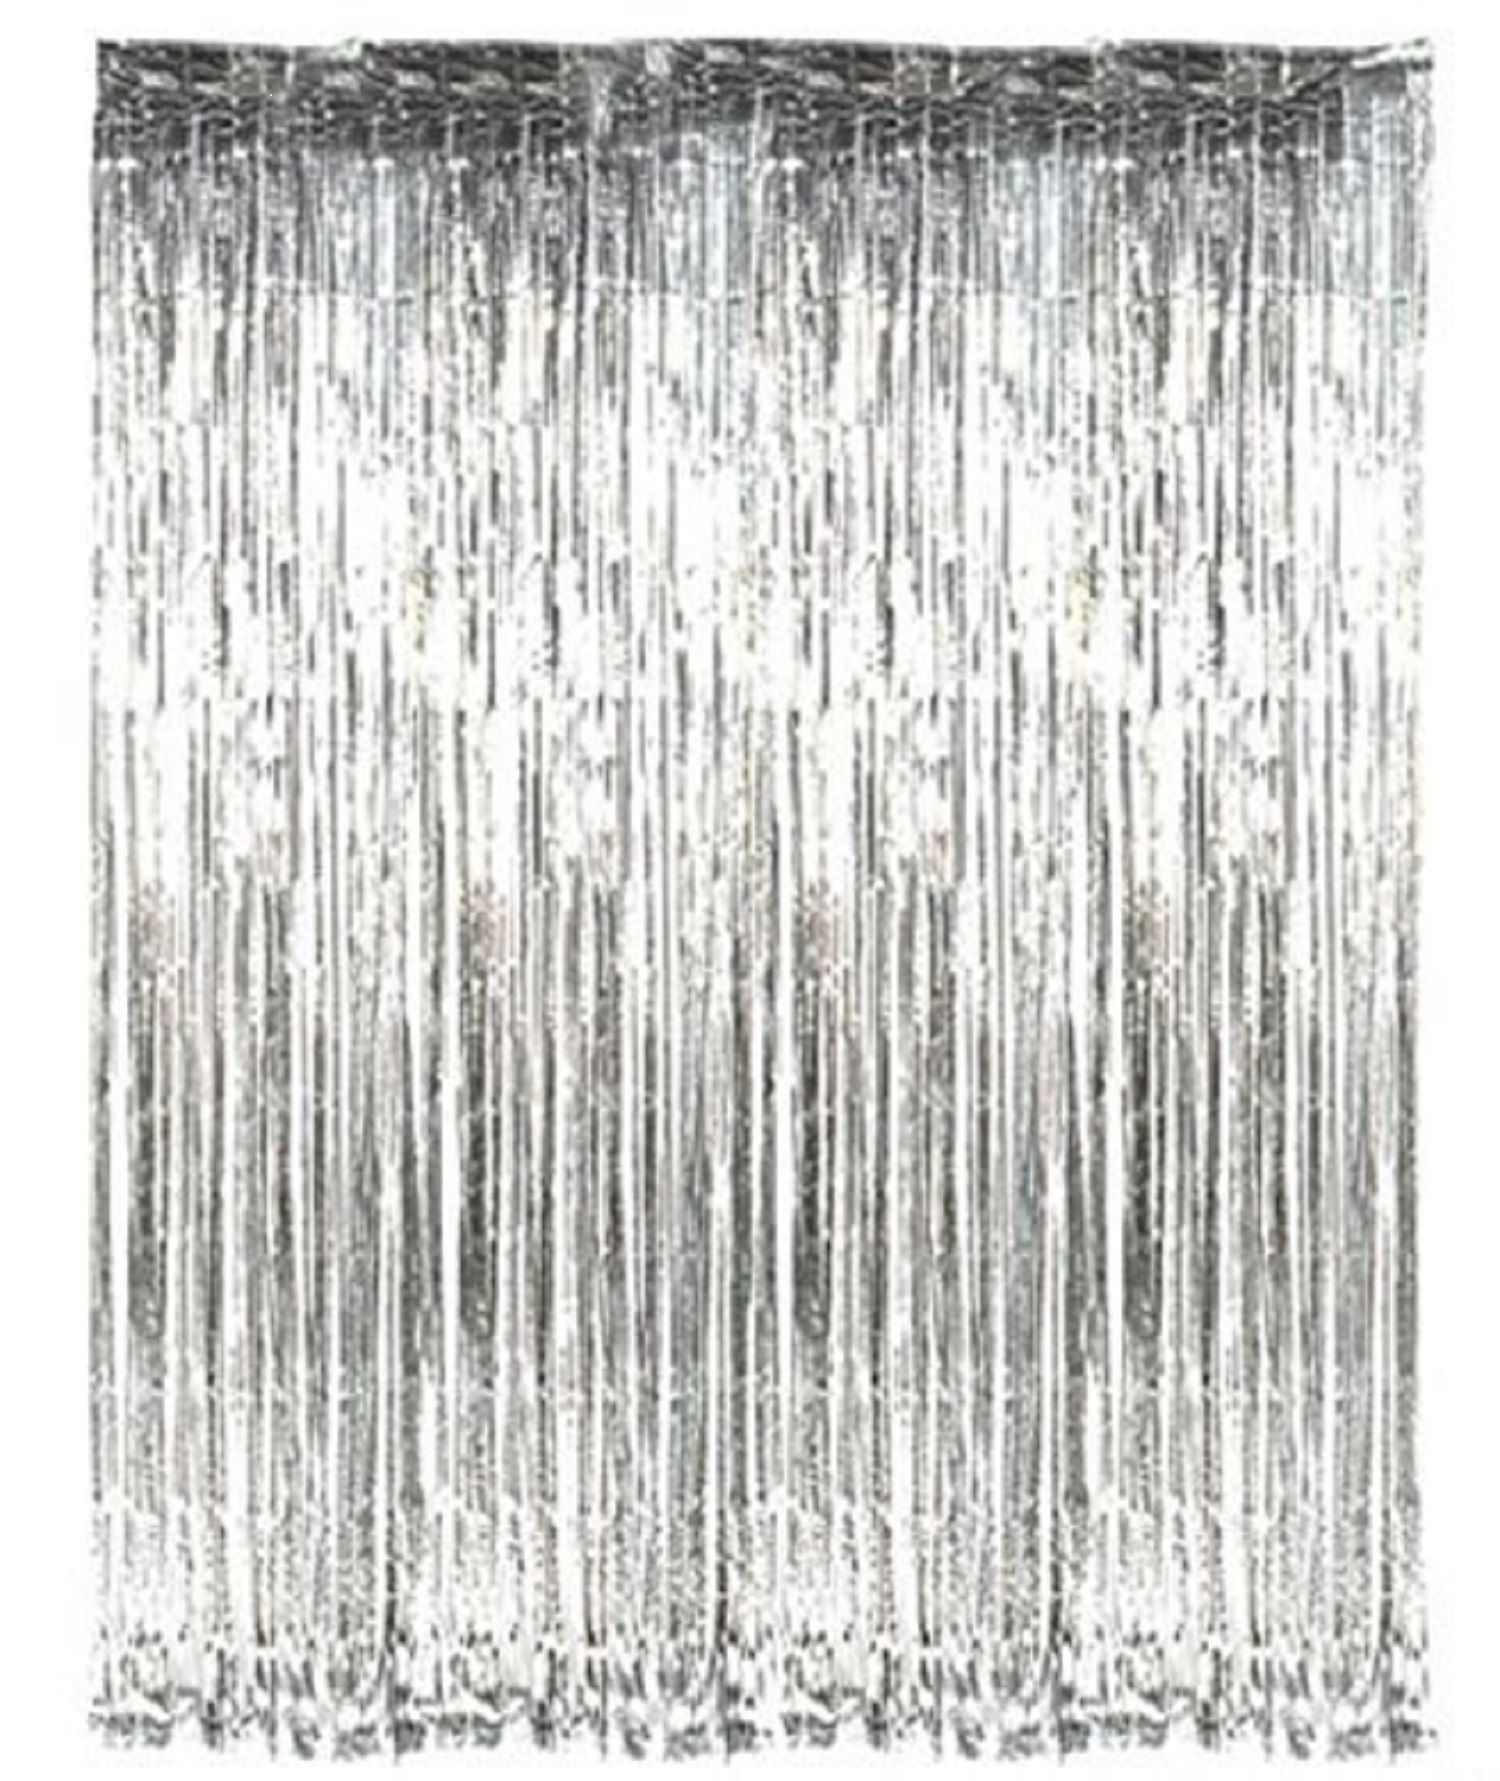 Party Propz Silver Metallic Fringe Foil Curtain, Silver